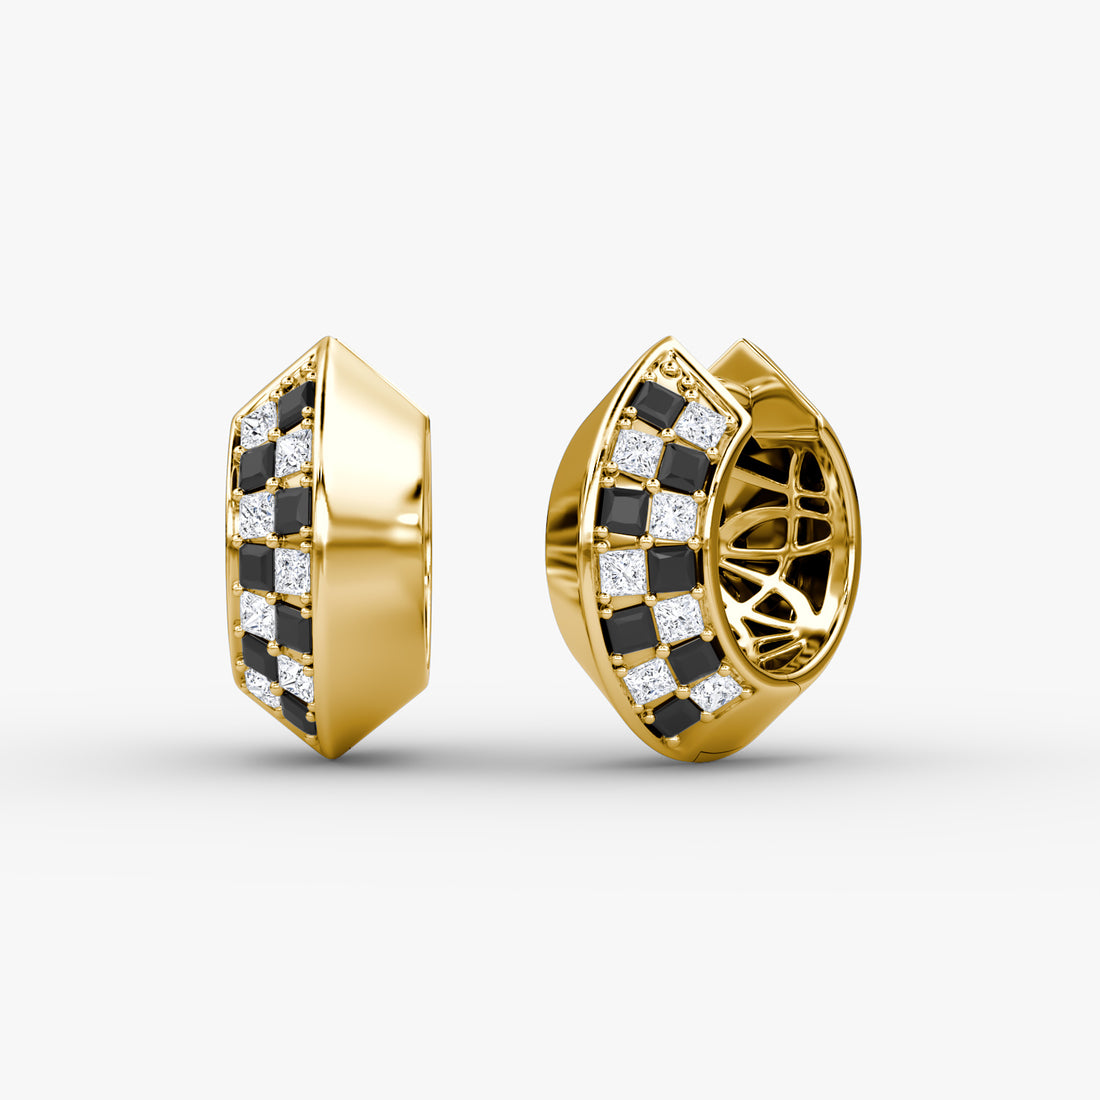 Always, A. fine jewelry earrings called "Taxi Huggies" featuring white and black diamonds and 14k gold